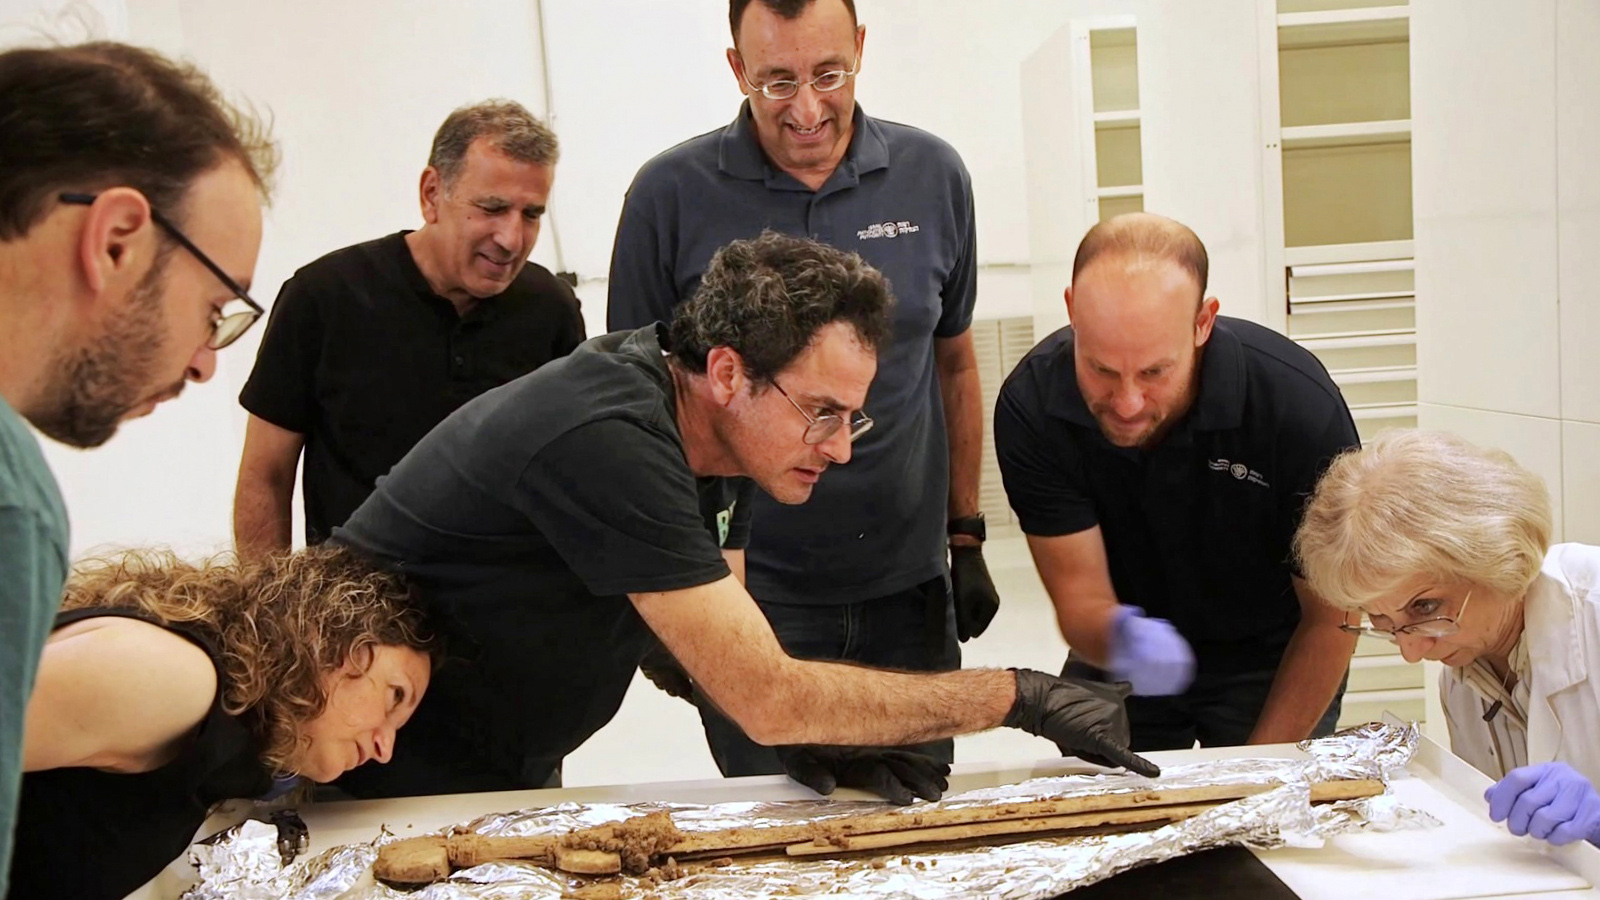 Israel Antiquities Authority researchers examine one of the swords recently discovered near the Dead Sea. Photo by Emil Aladjem, Israel Antiquities Authority